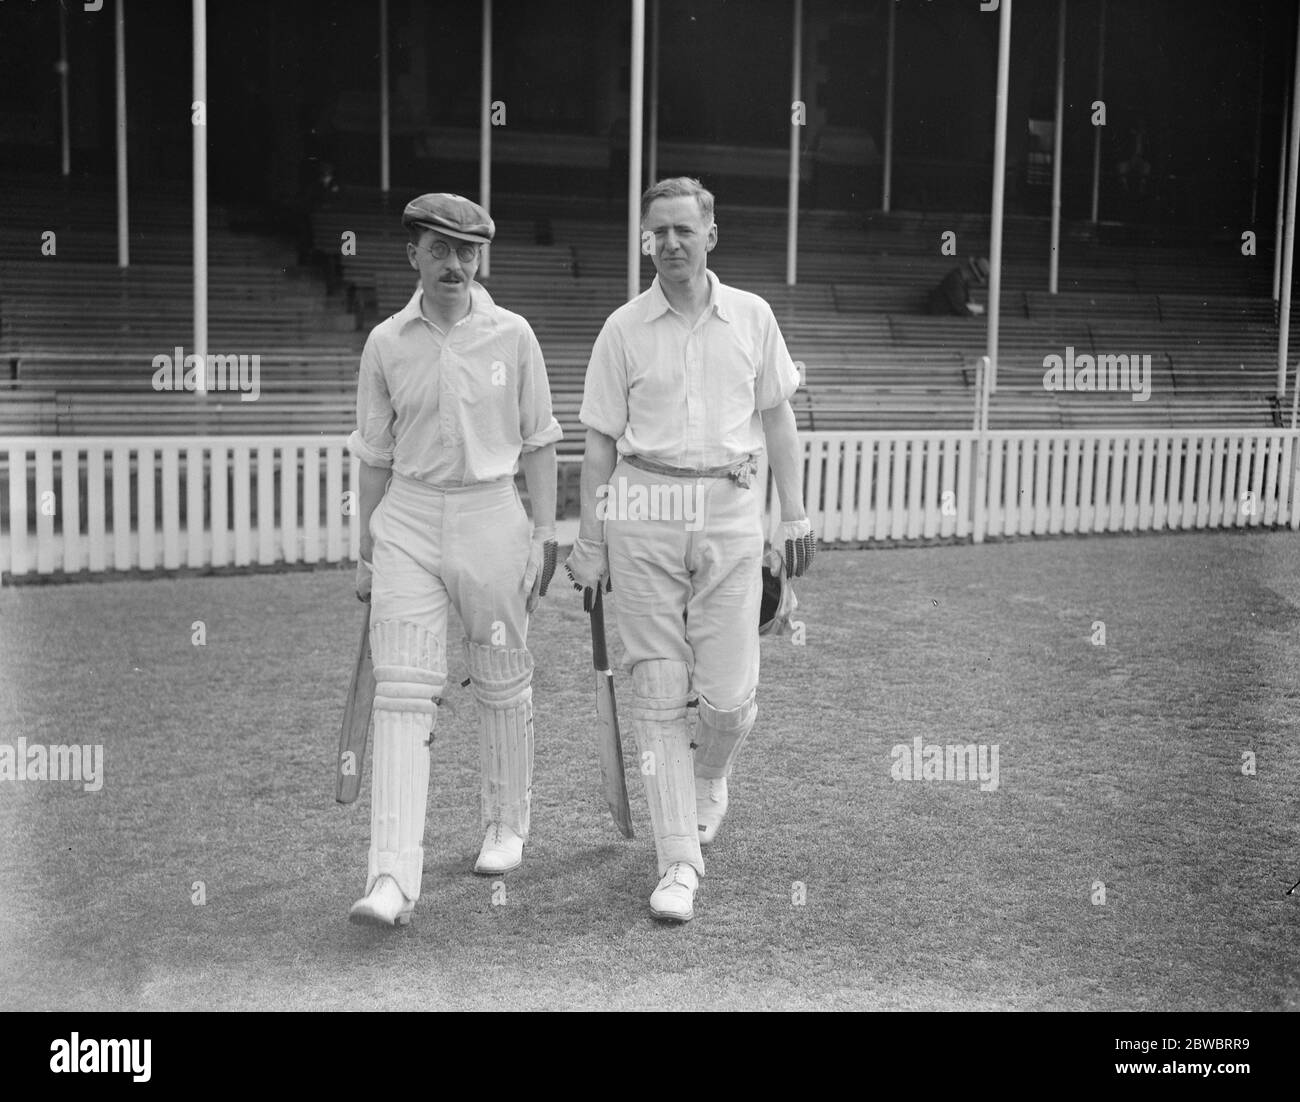 Parliamentary cricket at the oval . House of Commons team V  Invalids Club  . Mr M R K Burge ( left ) and Mr Clifford Bax going in to bat for the  Invalids Club  . 29 May 1924 Stock Photo